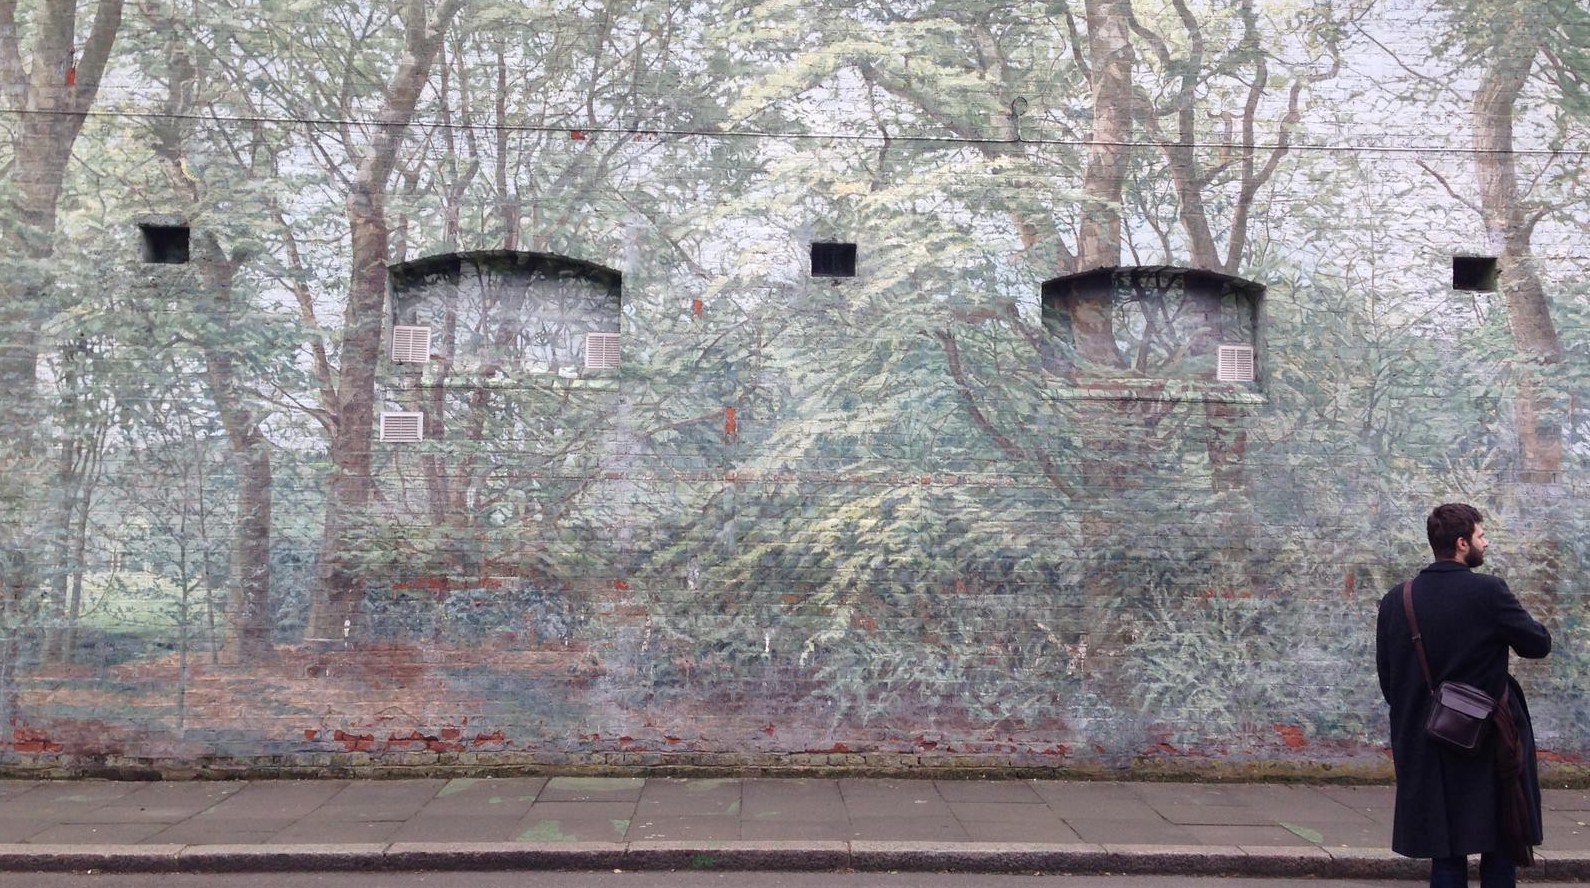 A wall mural of a dense wood, painted on the side of a brick building. A man stands in front of it, admiring it.